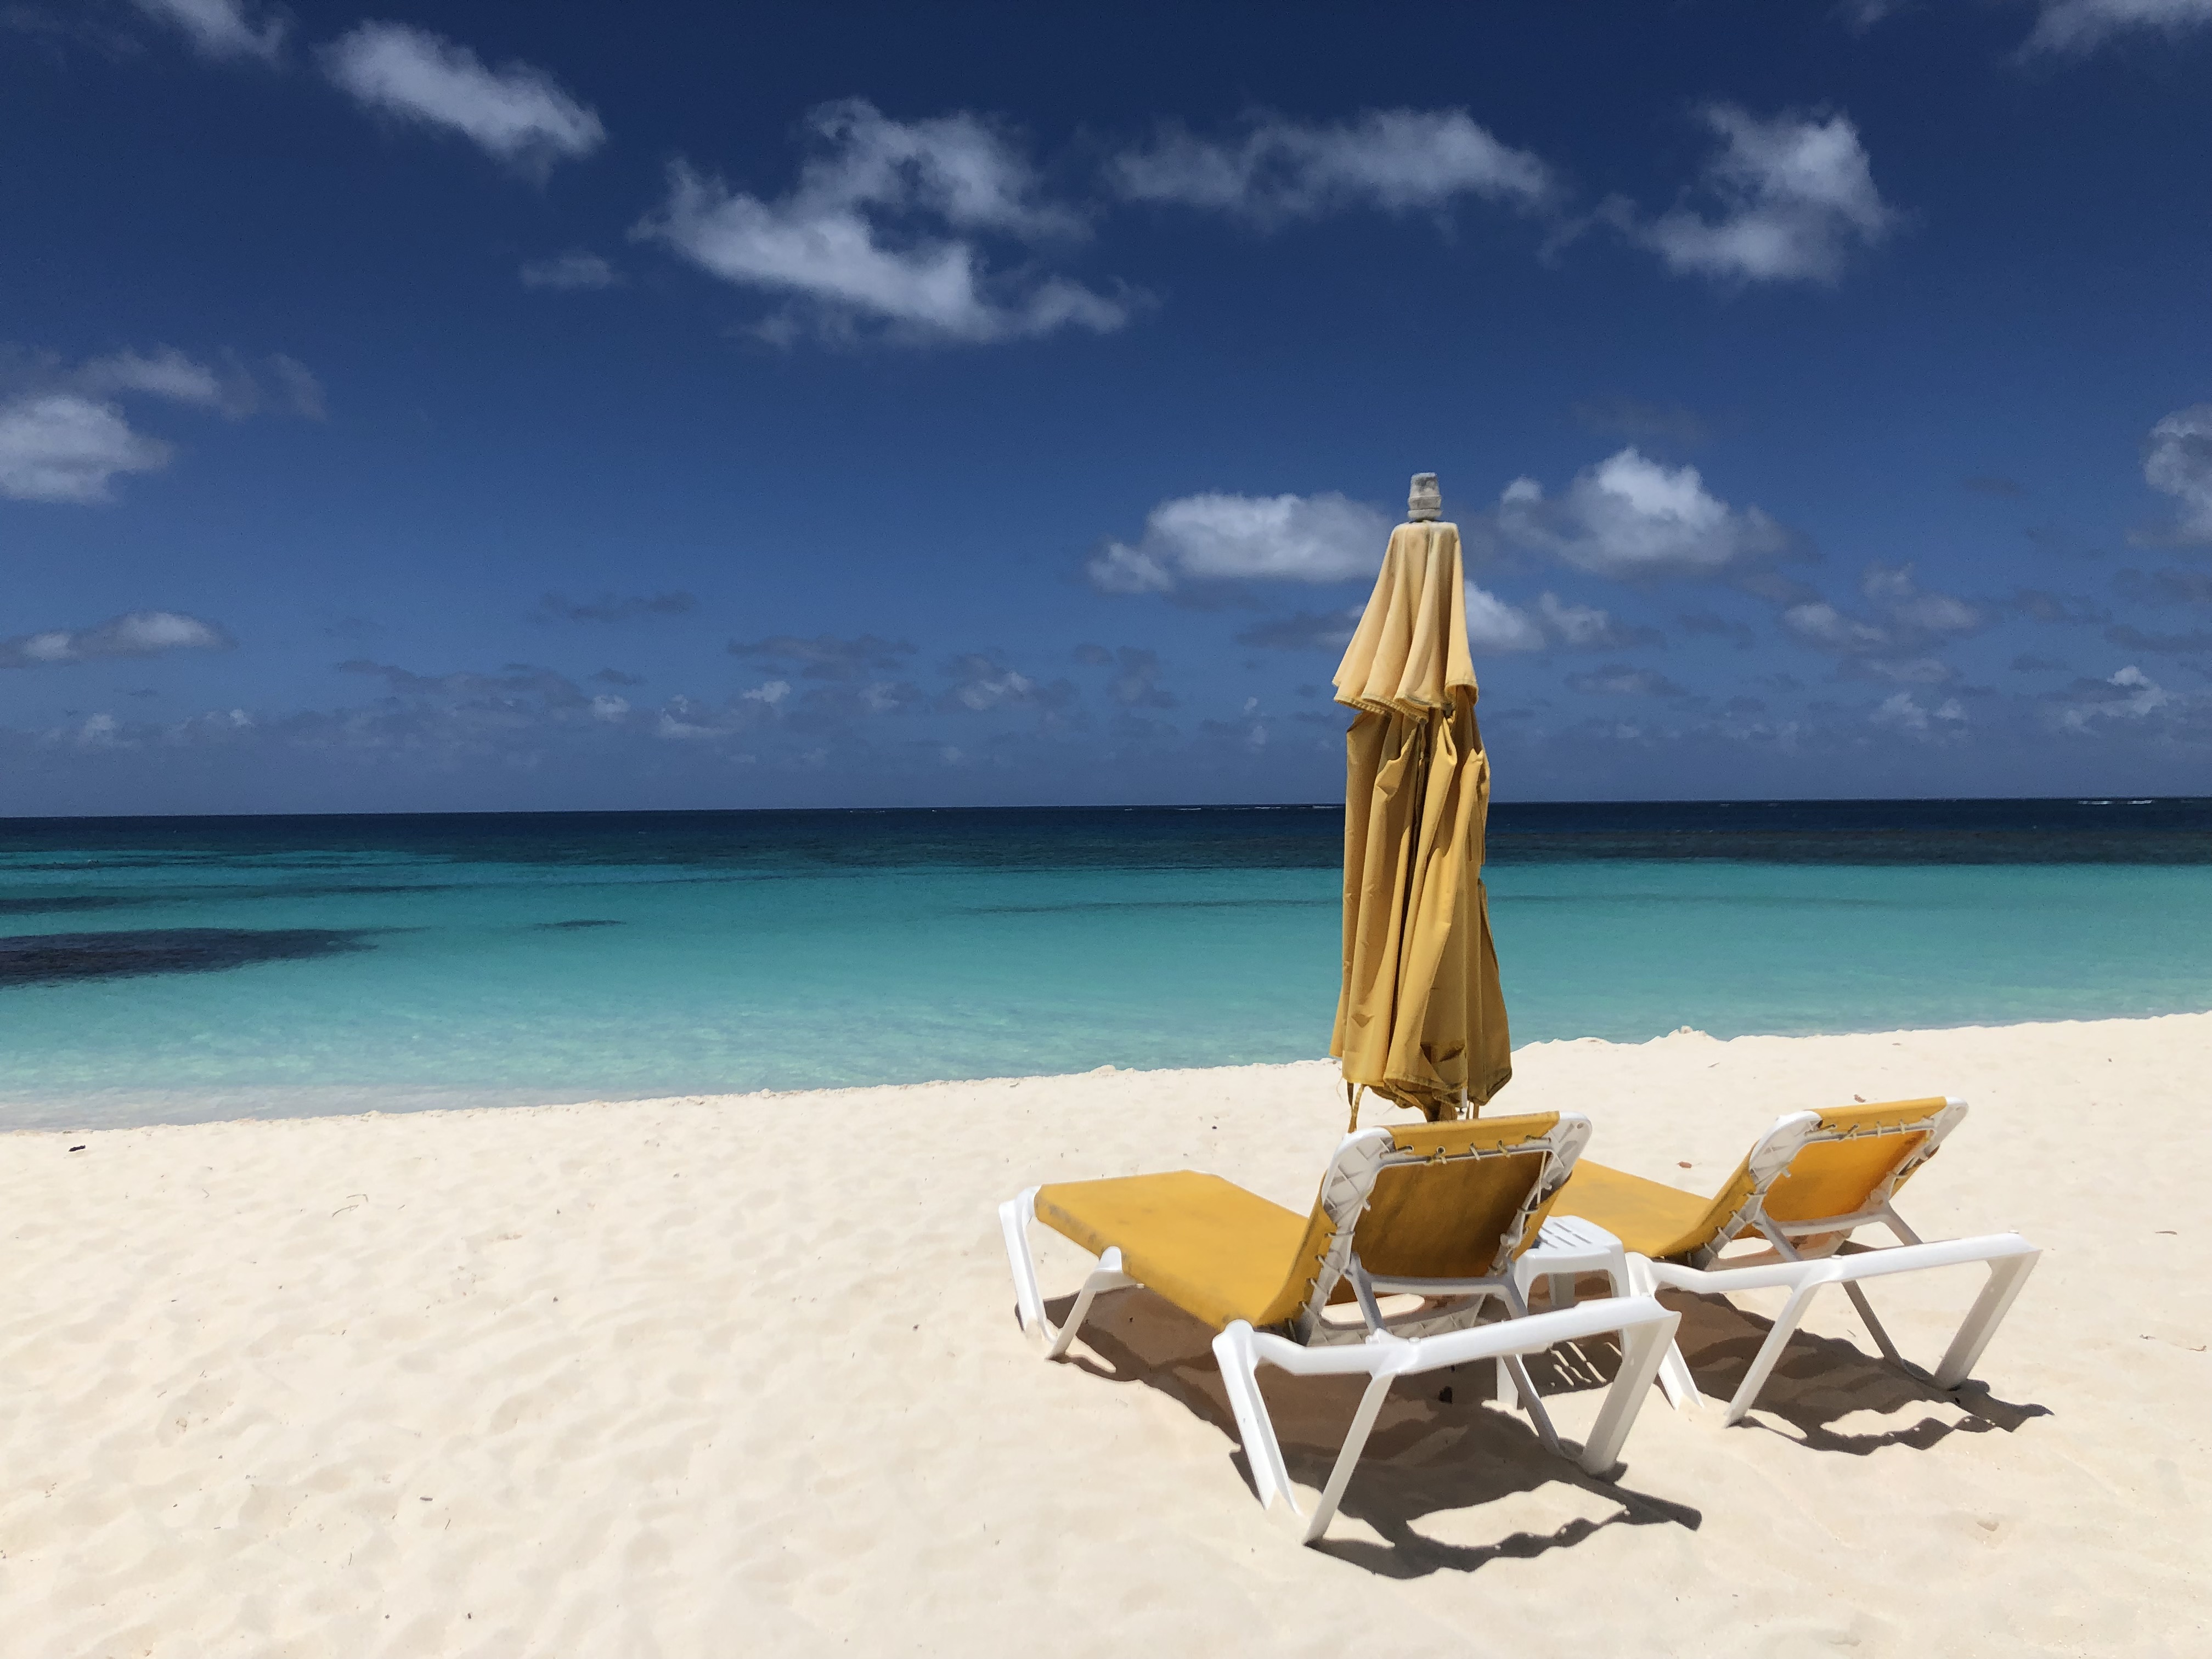 Two beach chairs and umbrella on deserted Caribbean beach.